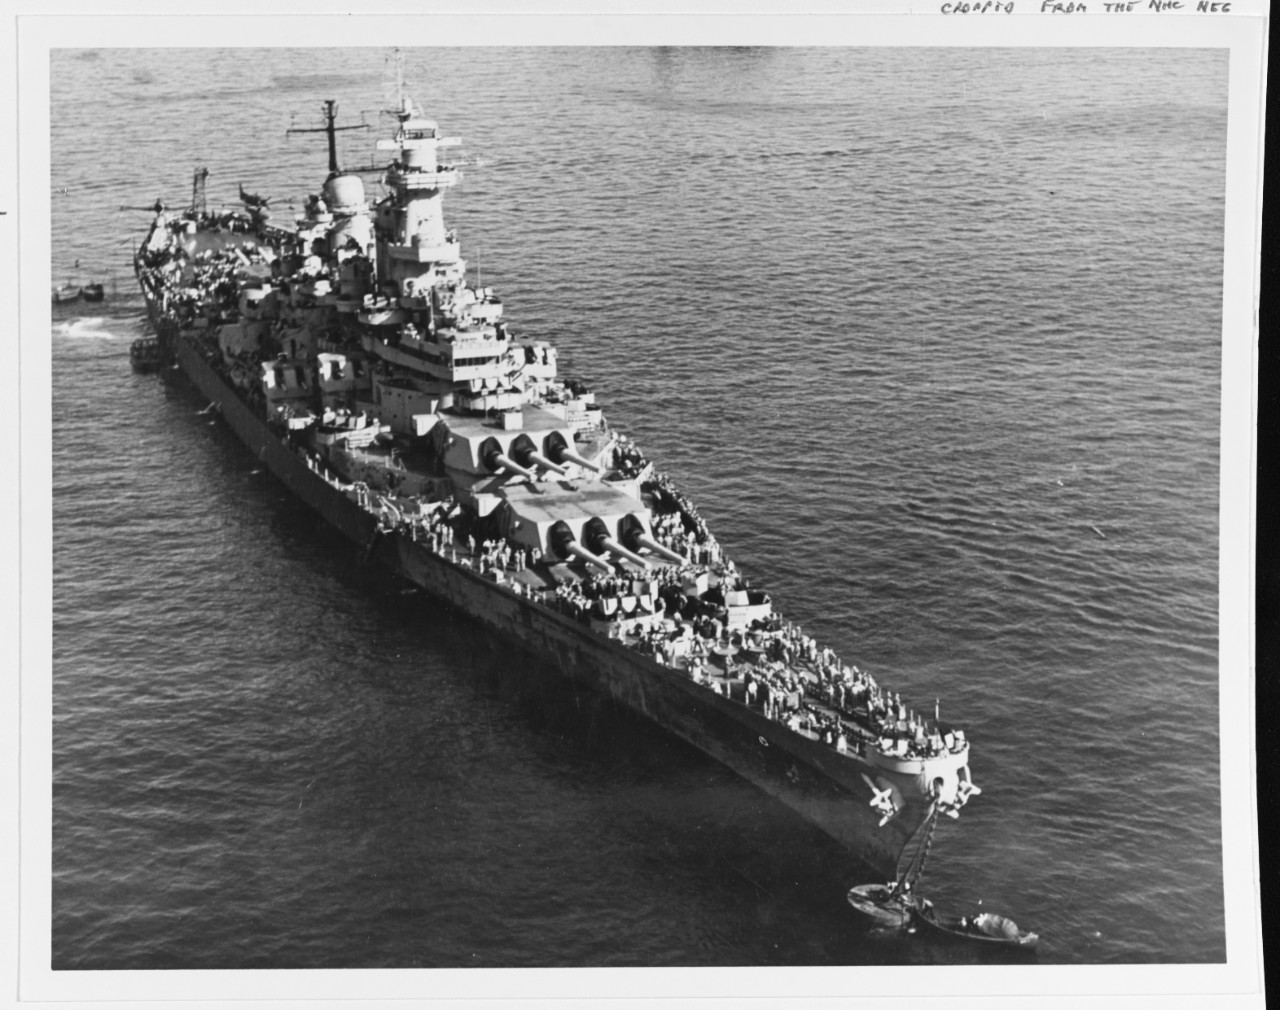 USS NEW JERSEY (BB-62) in harbor at Guam